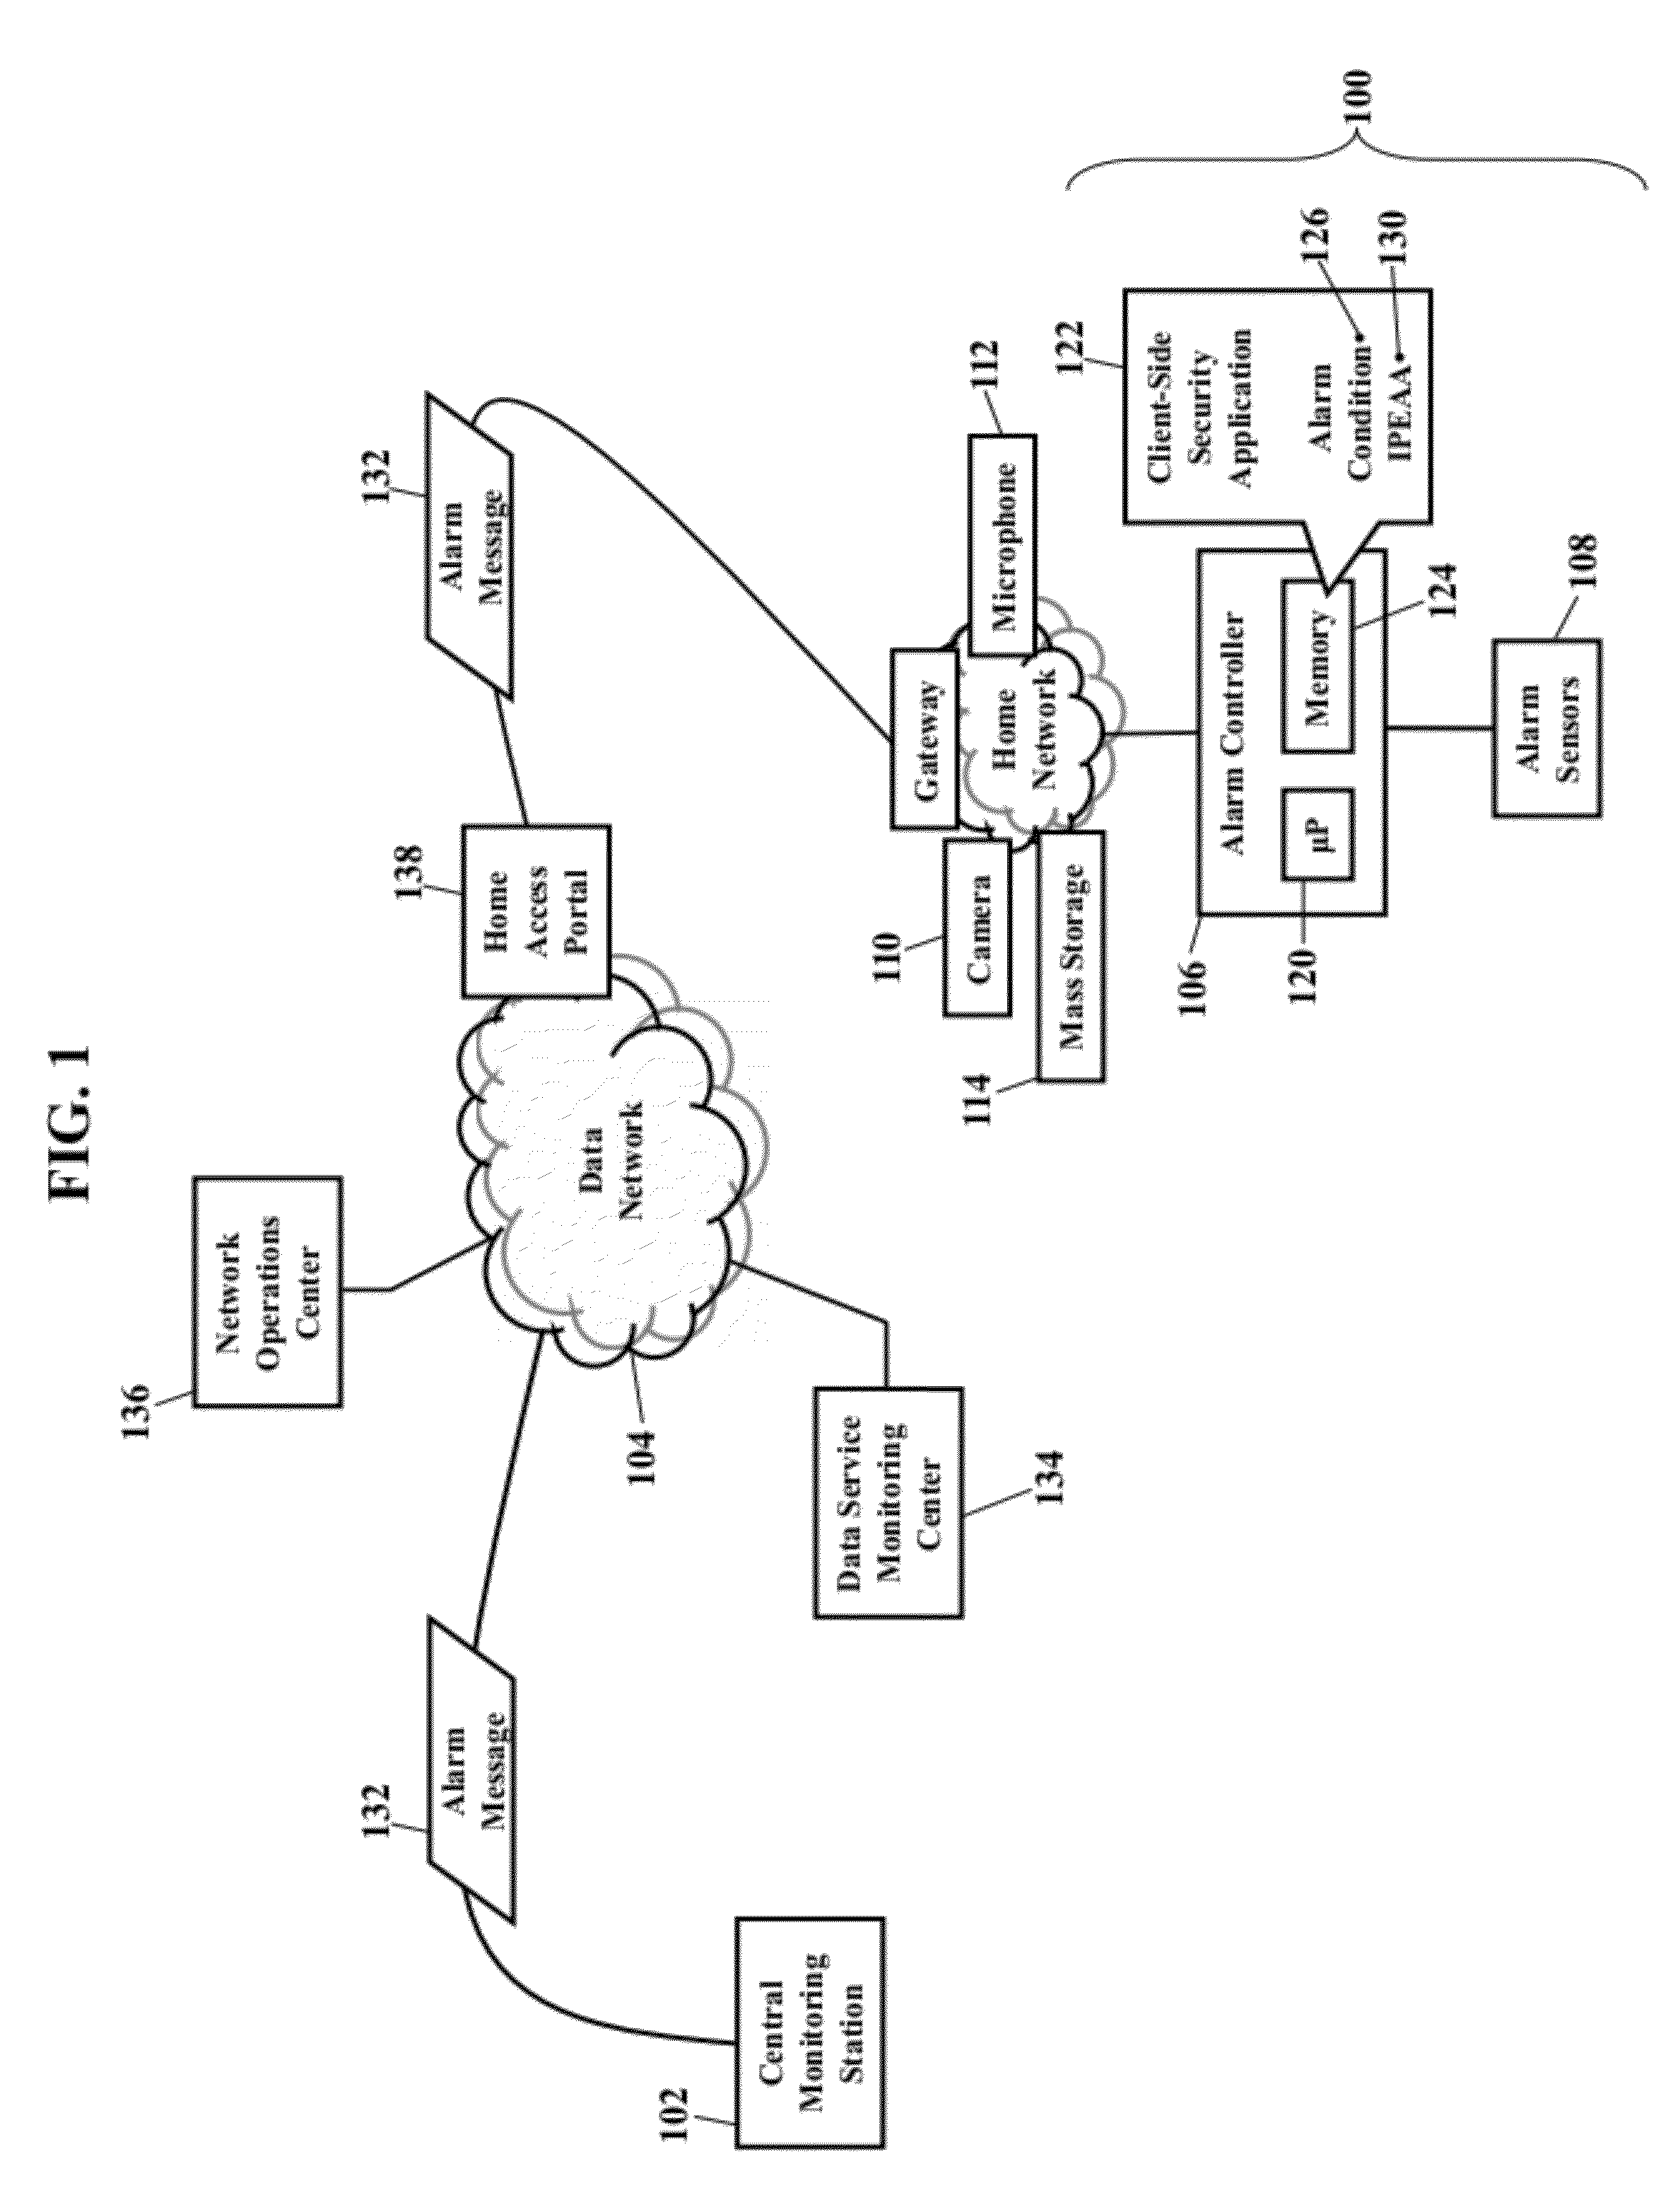 Methods, systems, and products for security systems